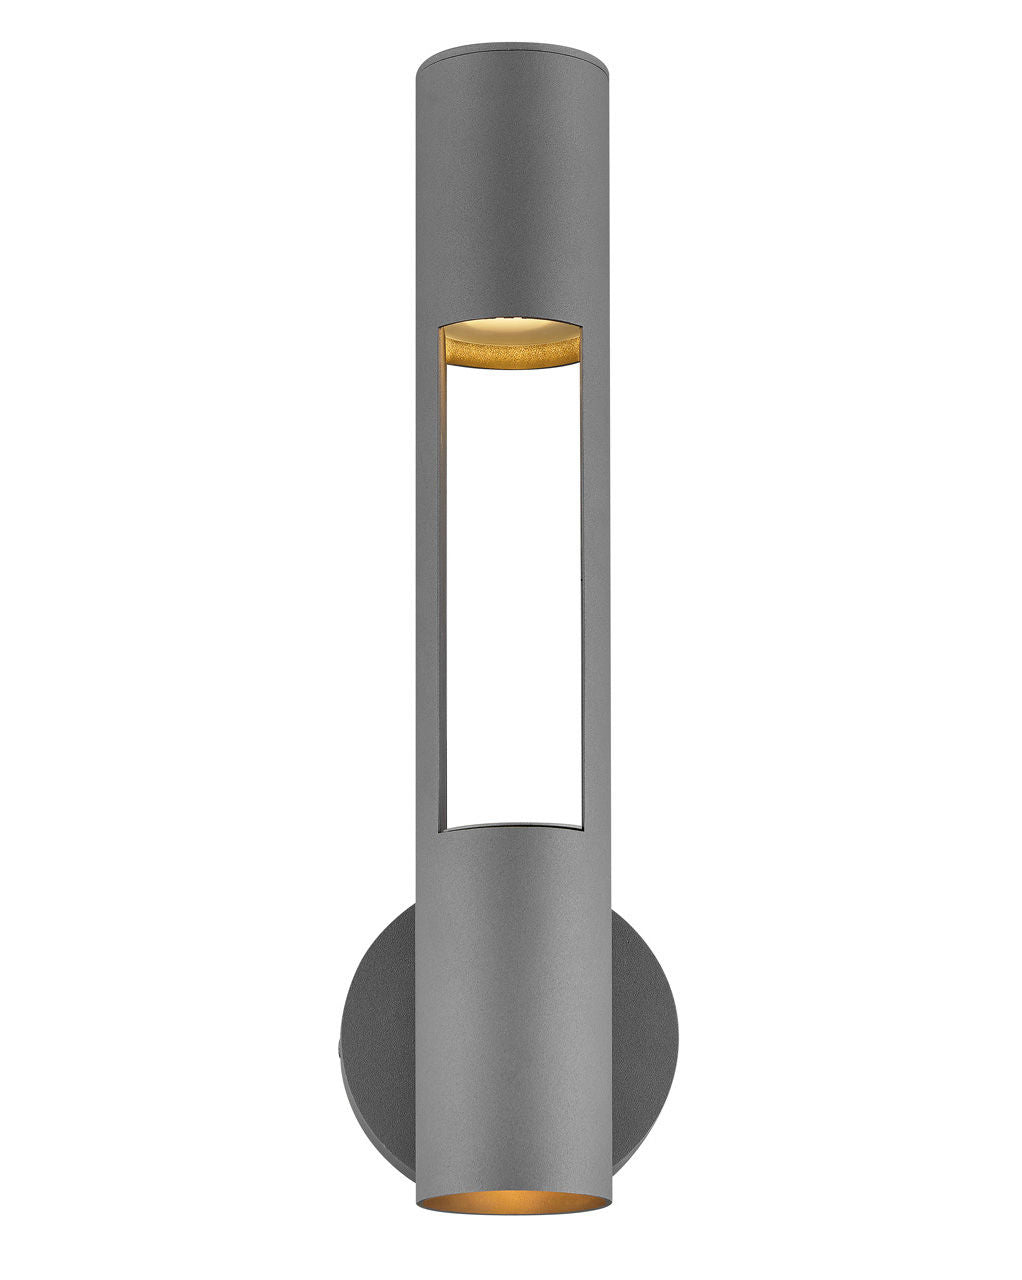 OSLO Outdoor sconce Graphite - 10194TG-LL | HINKLEY